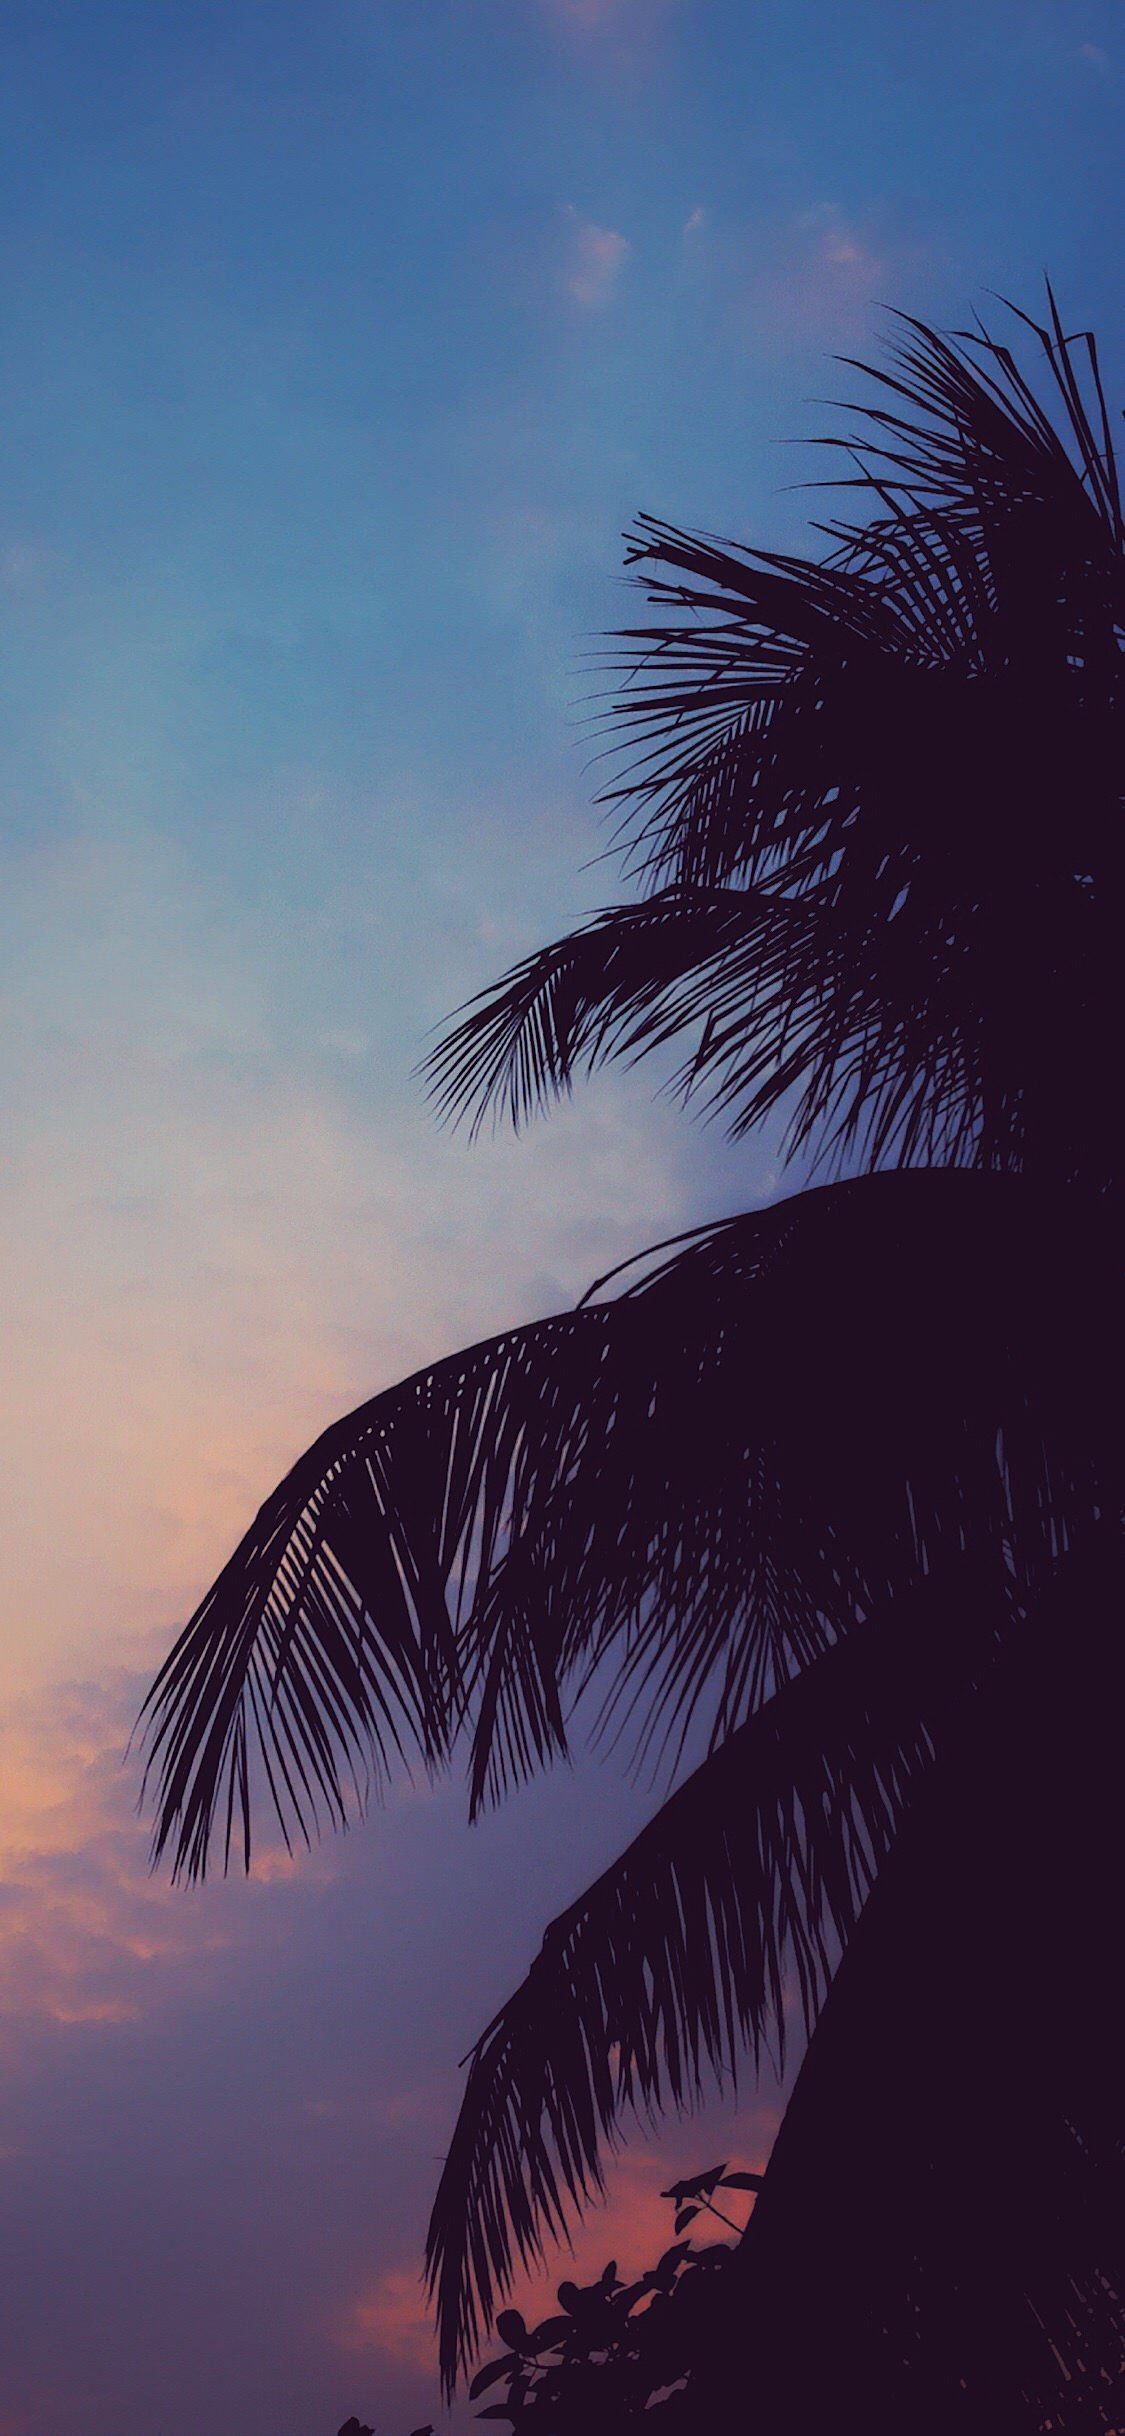 chill vibes. Chill wallpaper, Sky aesthetic, iPhone wallpaper tumblr aesthetic